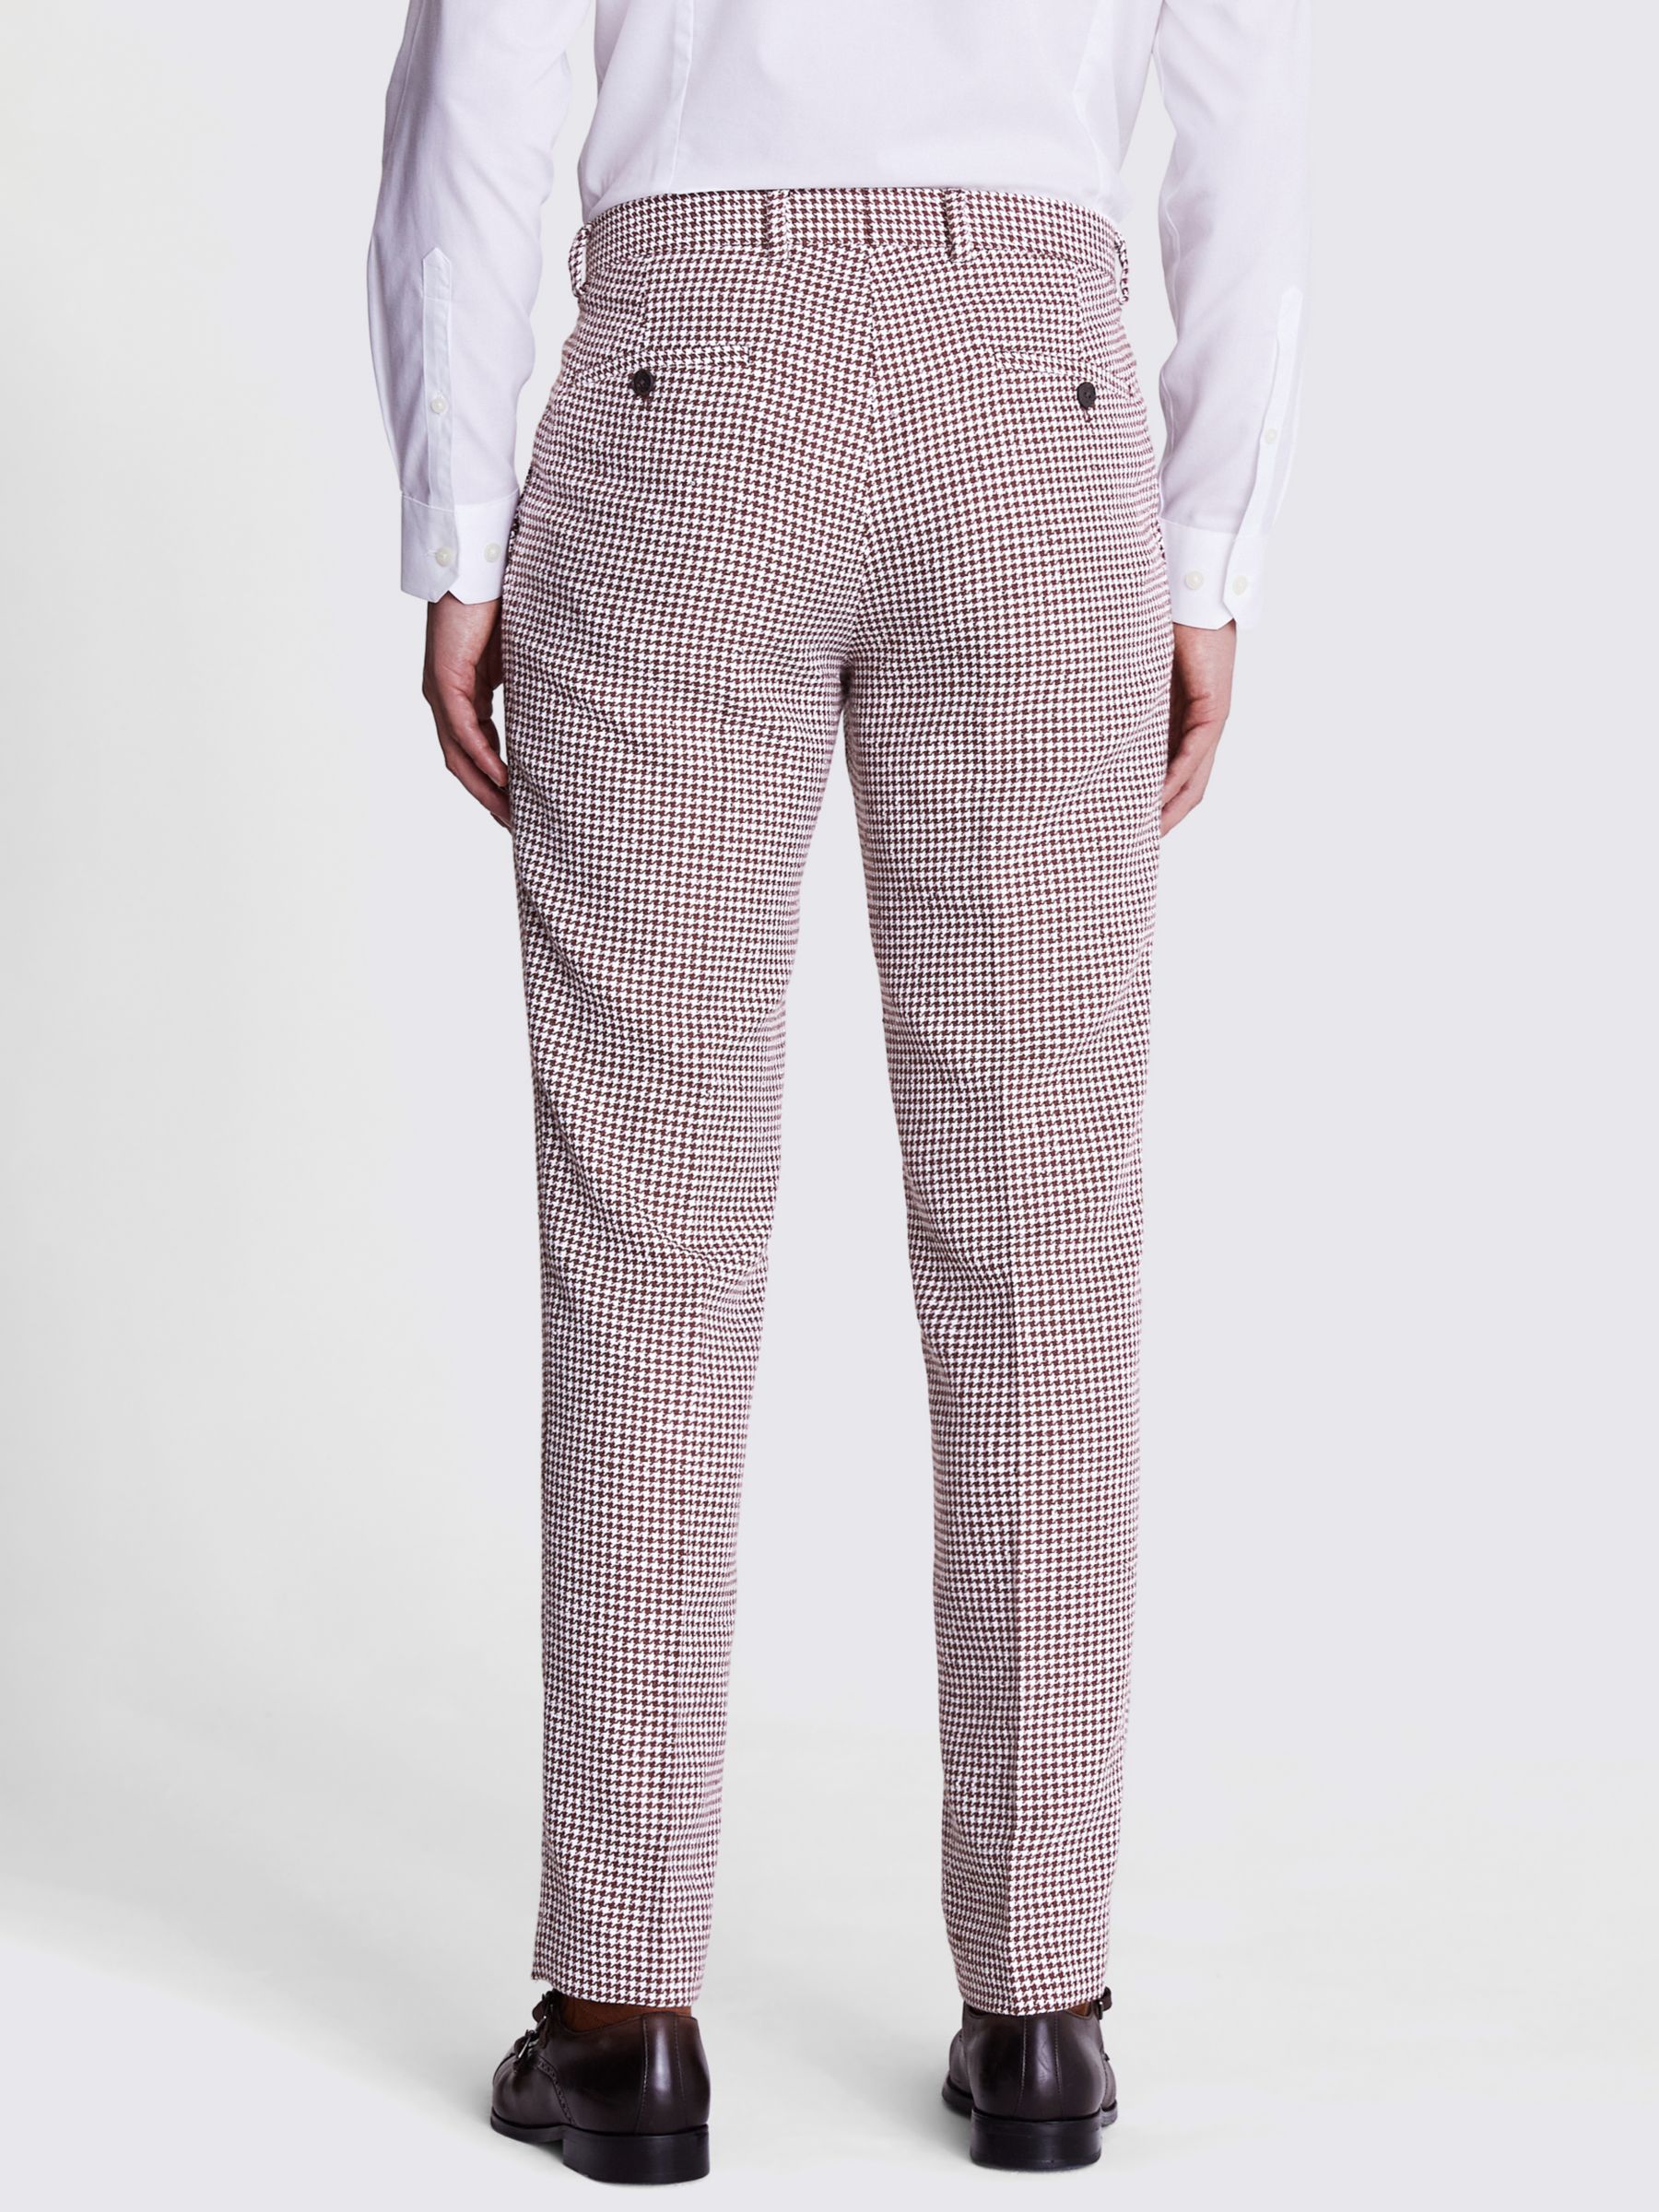 Moss Slim Fit Houndstooth Suit Trousers, Copper/White, 38L